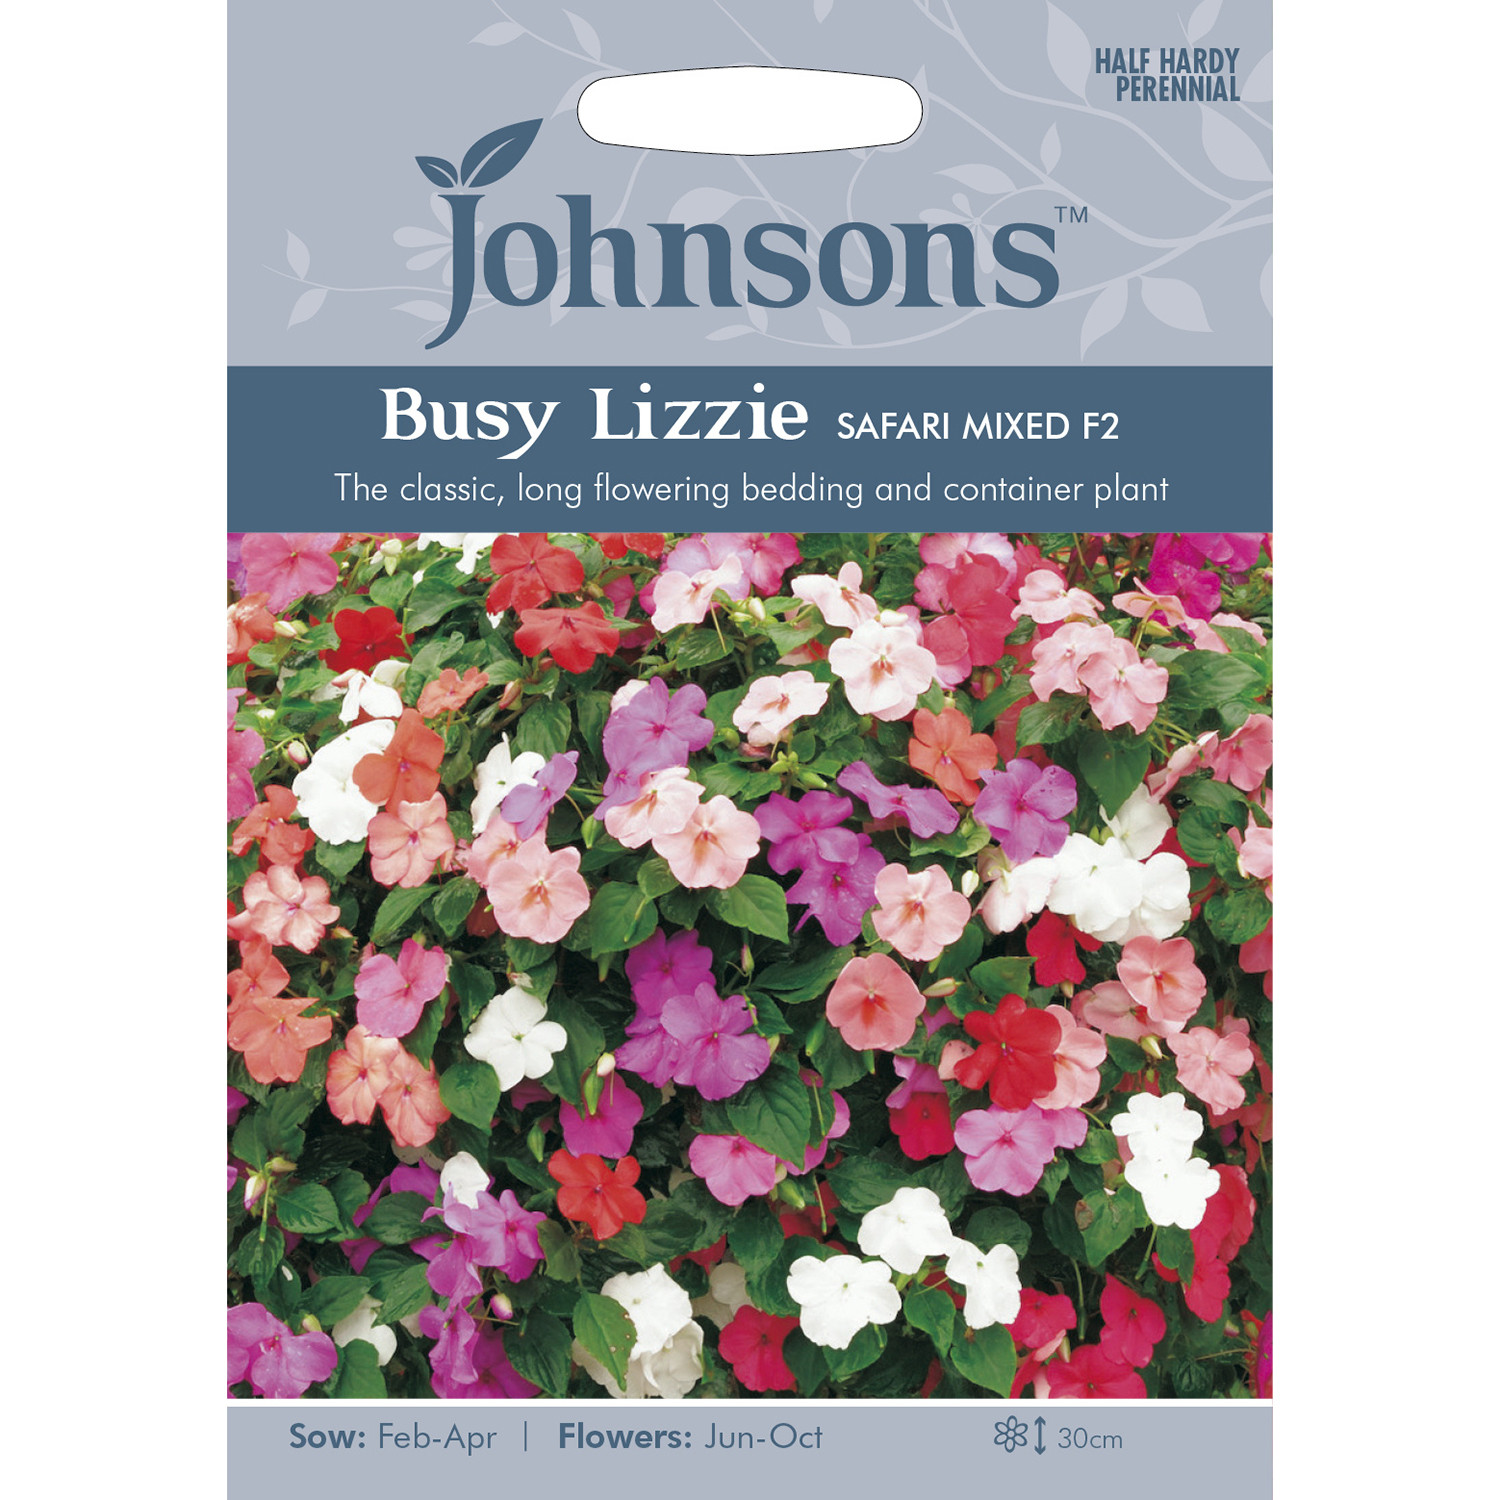 Johnsons Busy Lizzie Mixed Safari F2 Flower Seeds Image 2